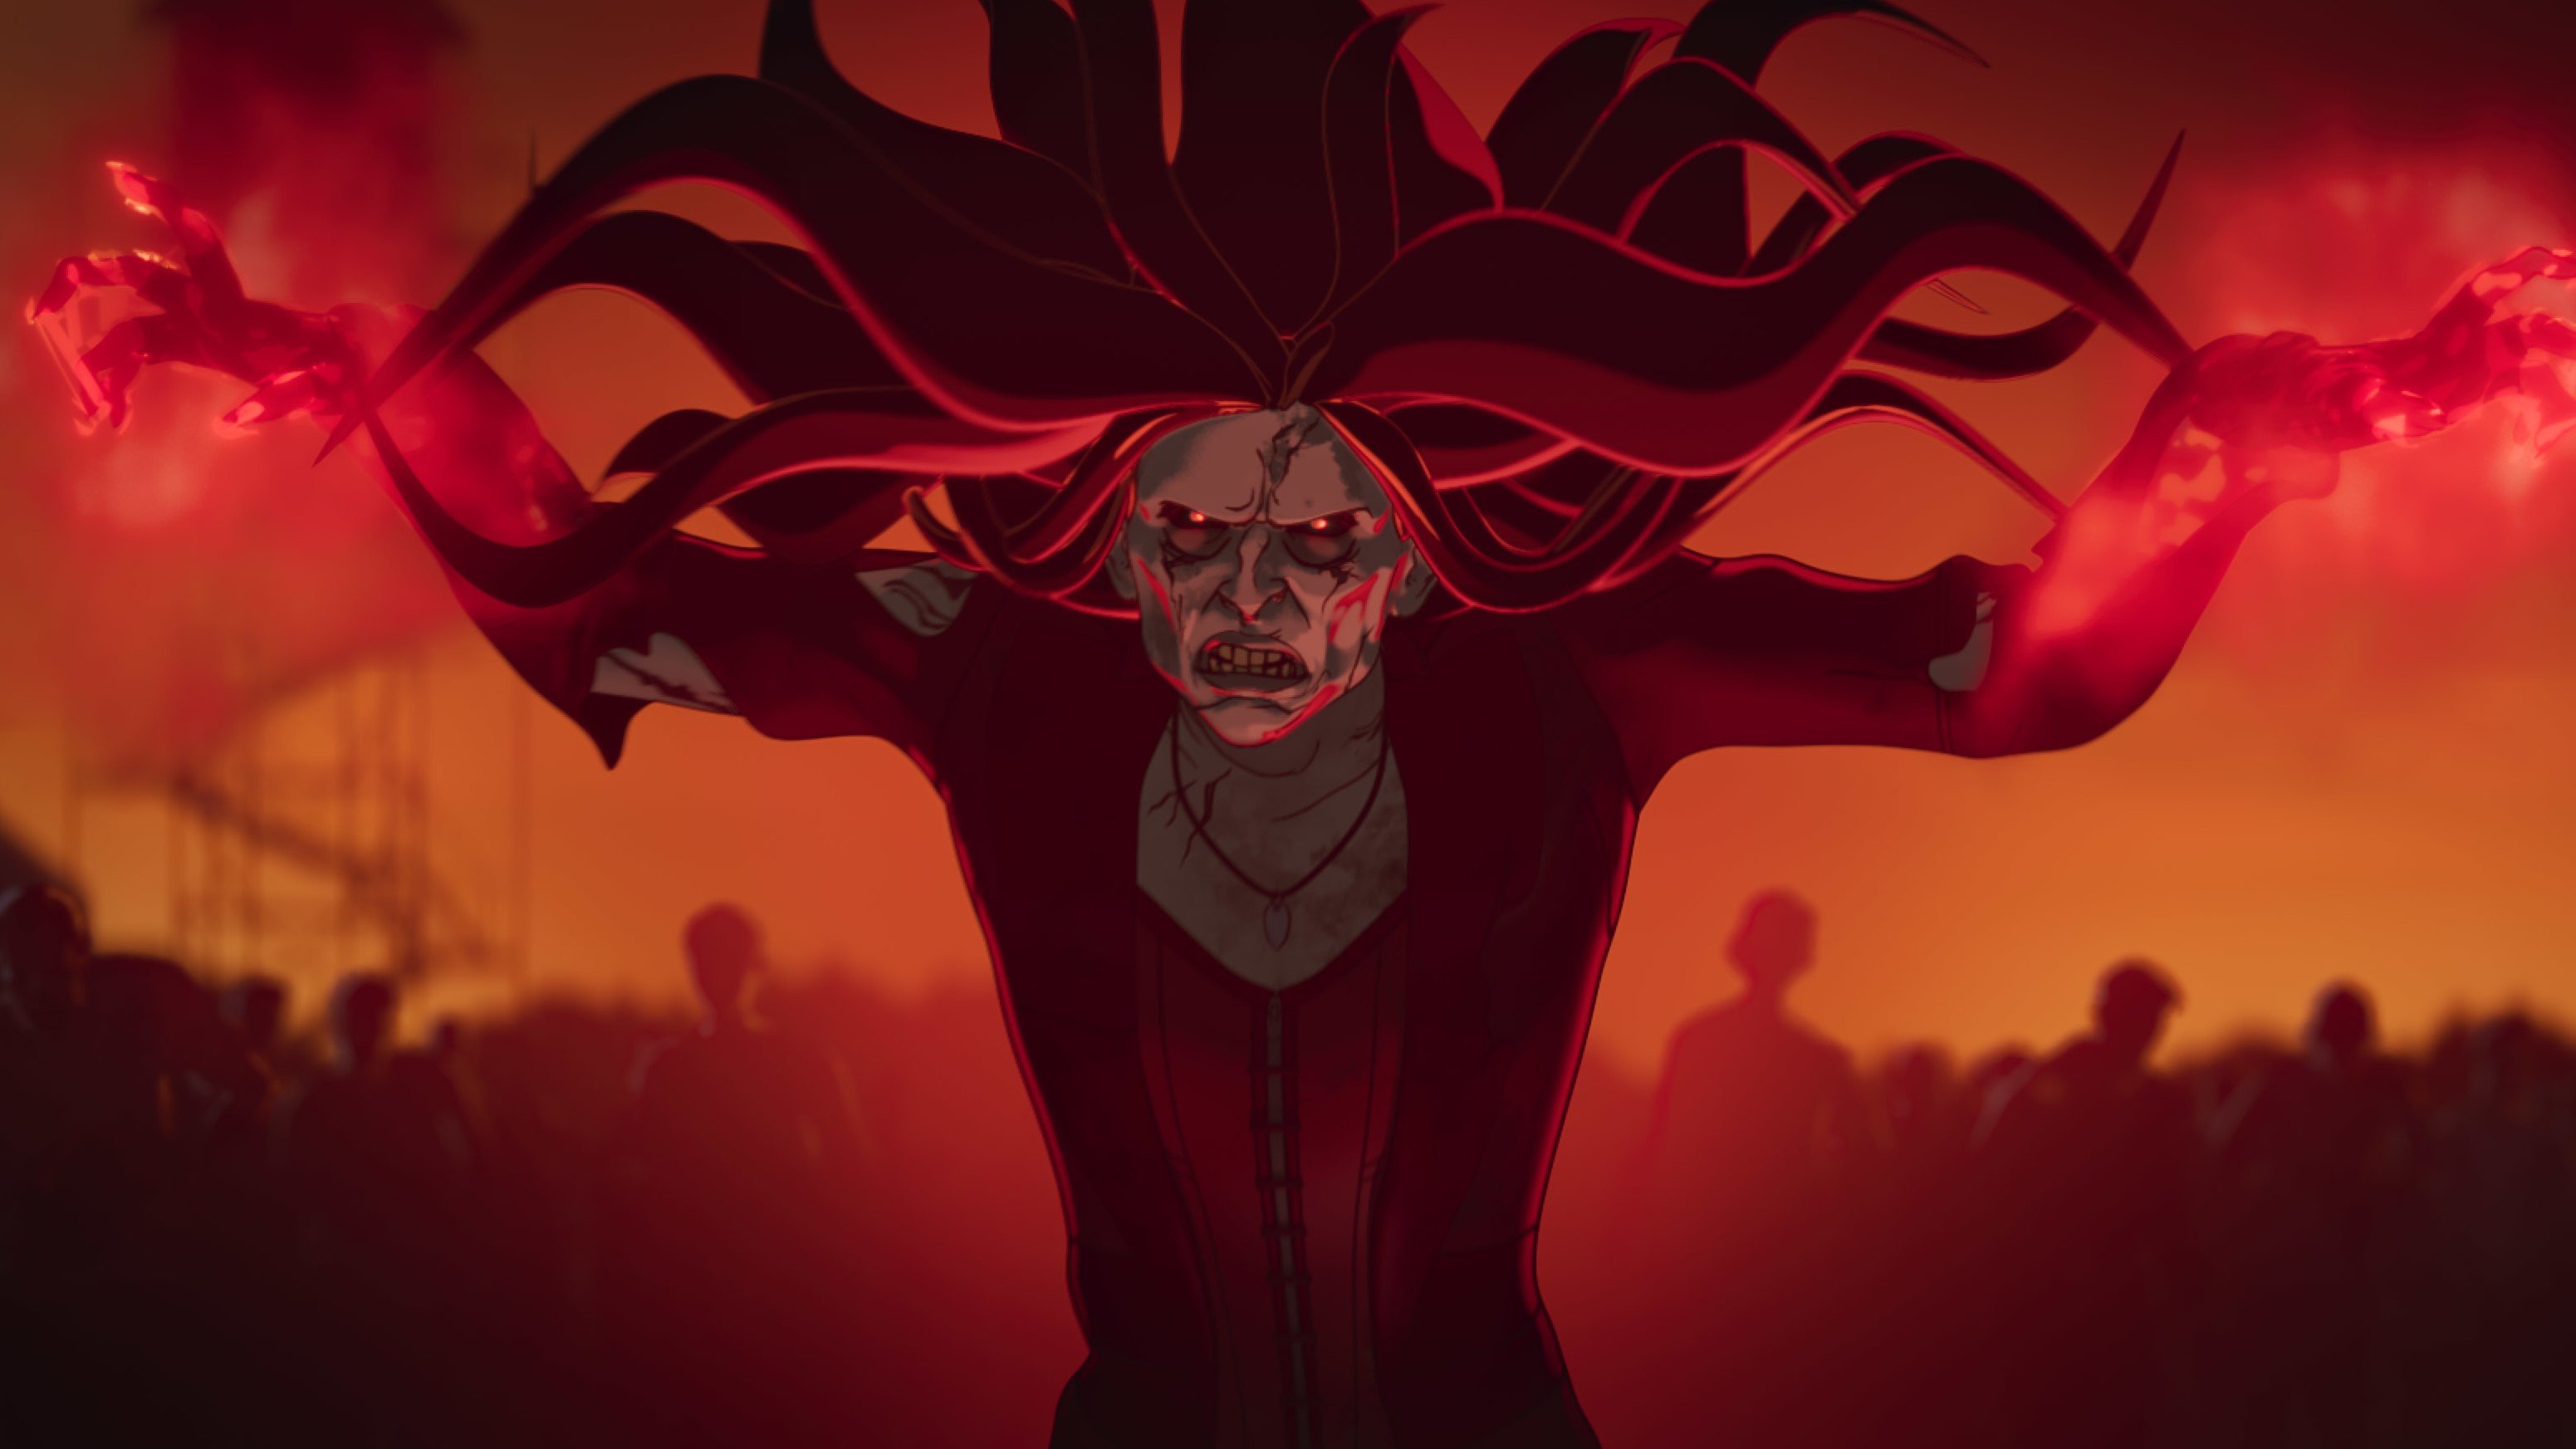 Zombie Scarlet Witch, who can be seen in the 'Doctor Strange 2' trailer, terrorizes Earth in 'What If...?' Season 1 Episode 5. In the animated photo, her skin is blue and deteriorating, her red costume is ripped, and she uses her magic.